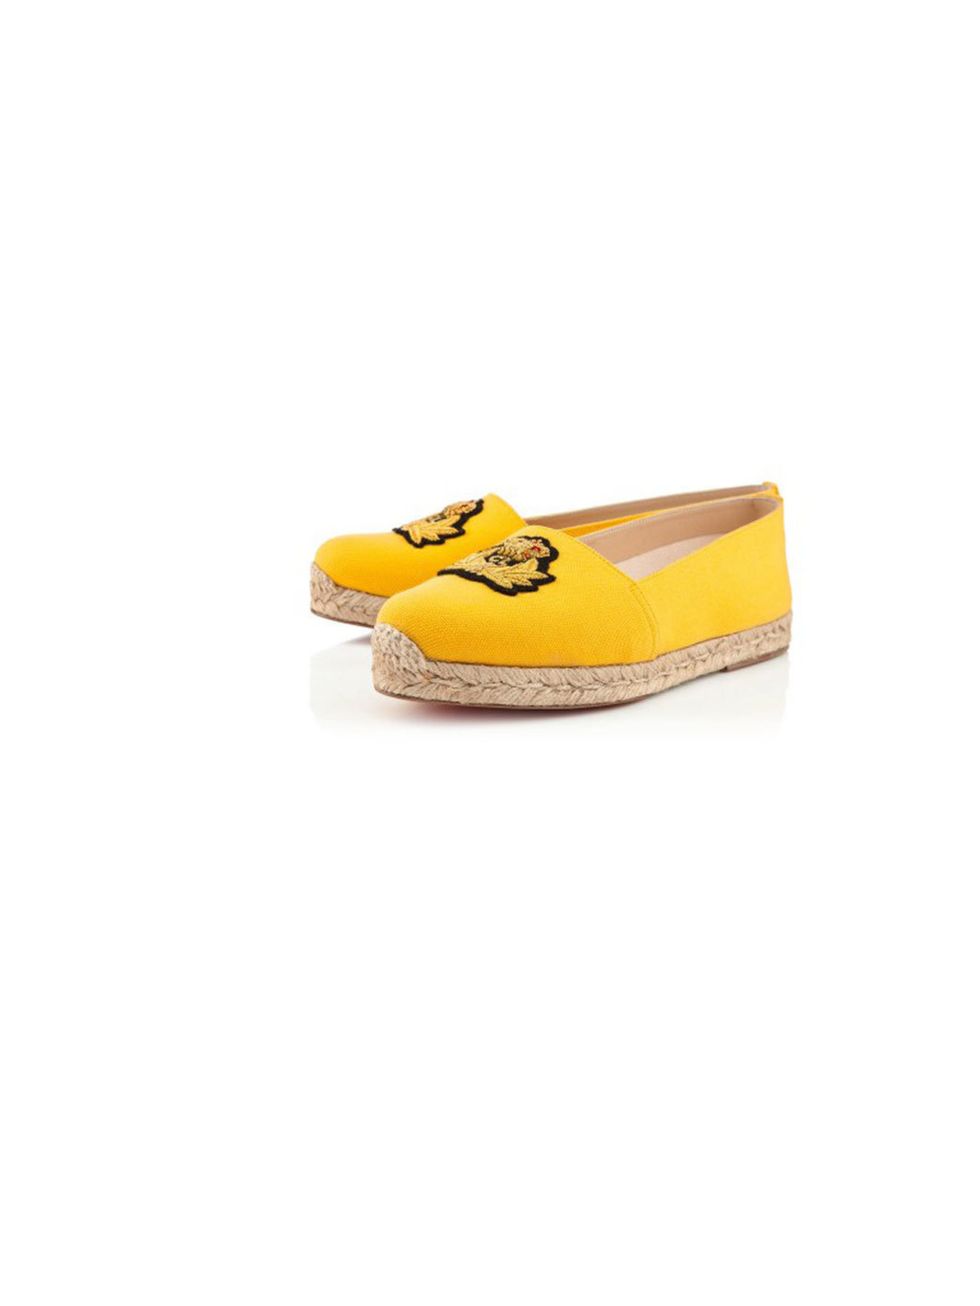 <p>Add some zest to your look with bang-on trend espadrilles in the summeriest of colours <a href="http://www.christianlouboutin.com/">Christian Louboutin</a> canary yellow espadrilles, £245</p>